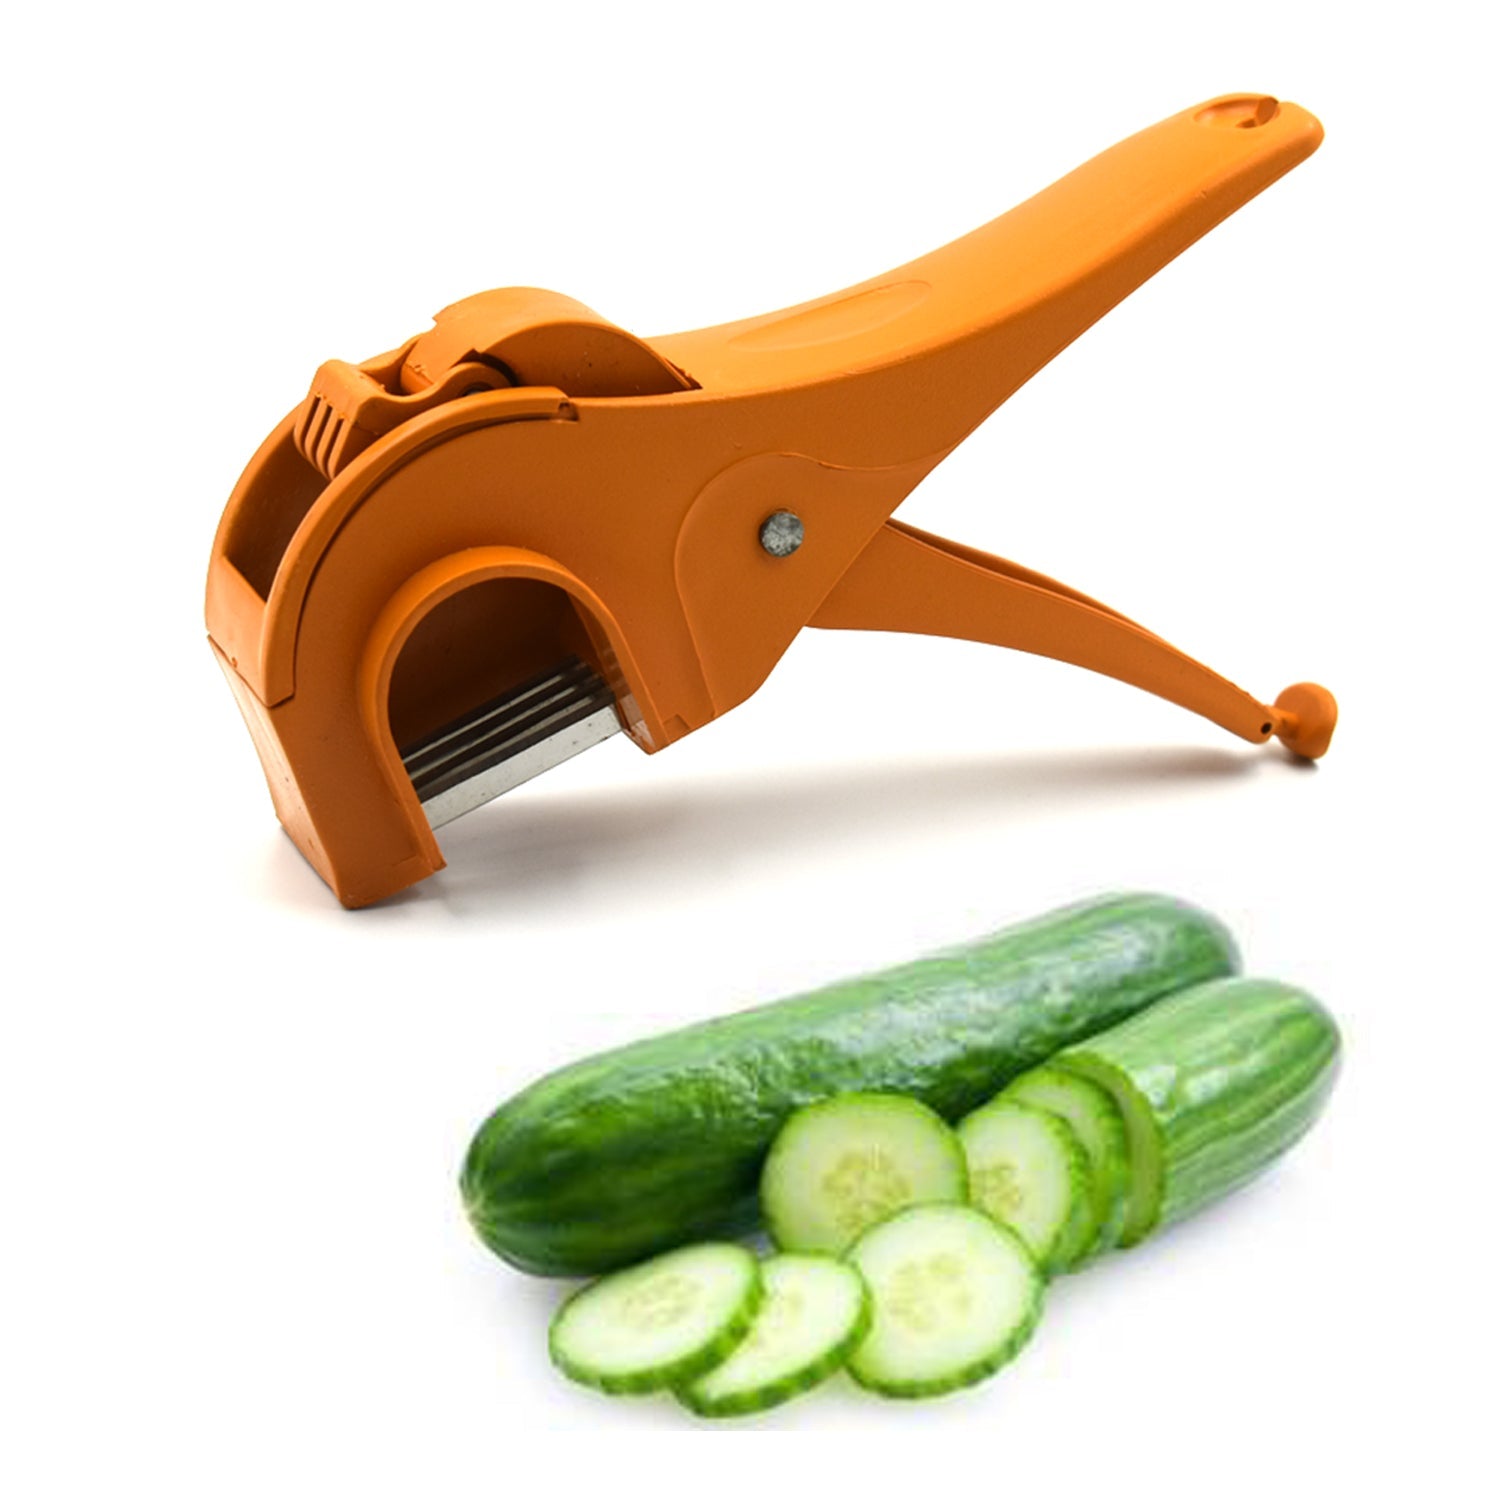 2682 Vegetable Cutter used in all kinds of household and kitchen purposes for cutting vegetables etc.